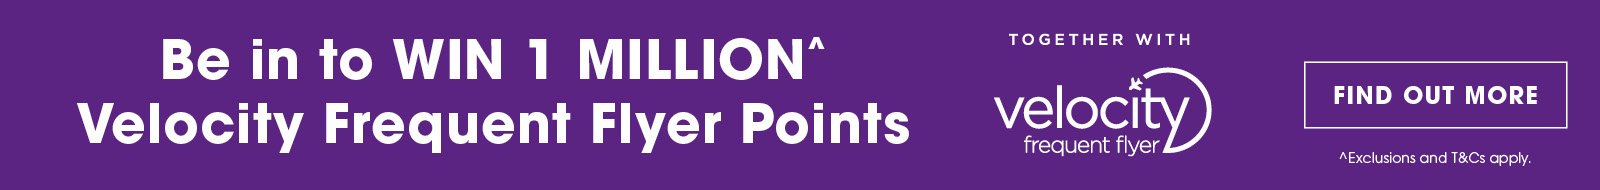 Win 1 million velocity frequent flyer points